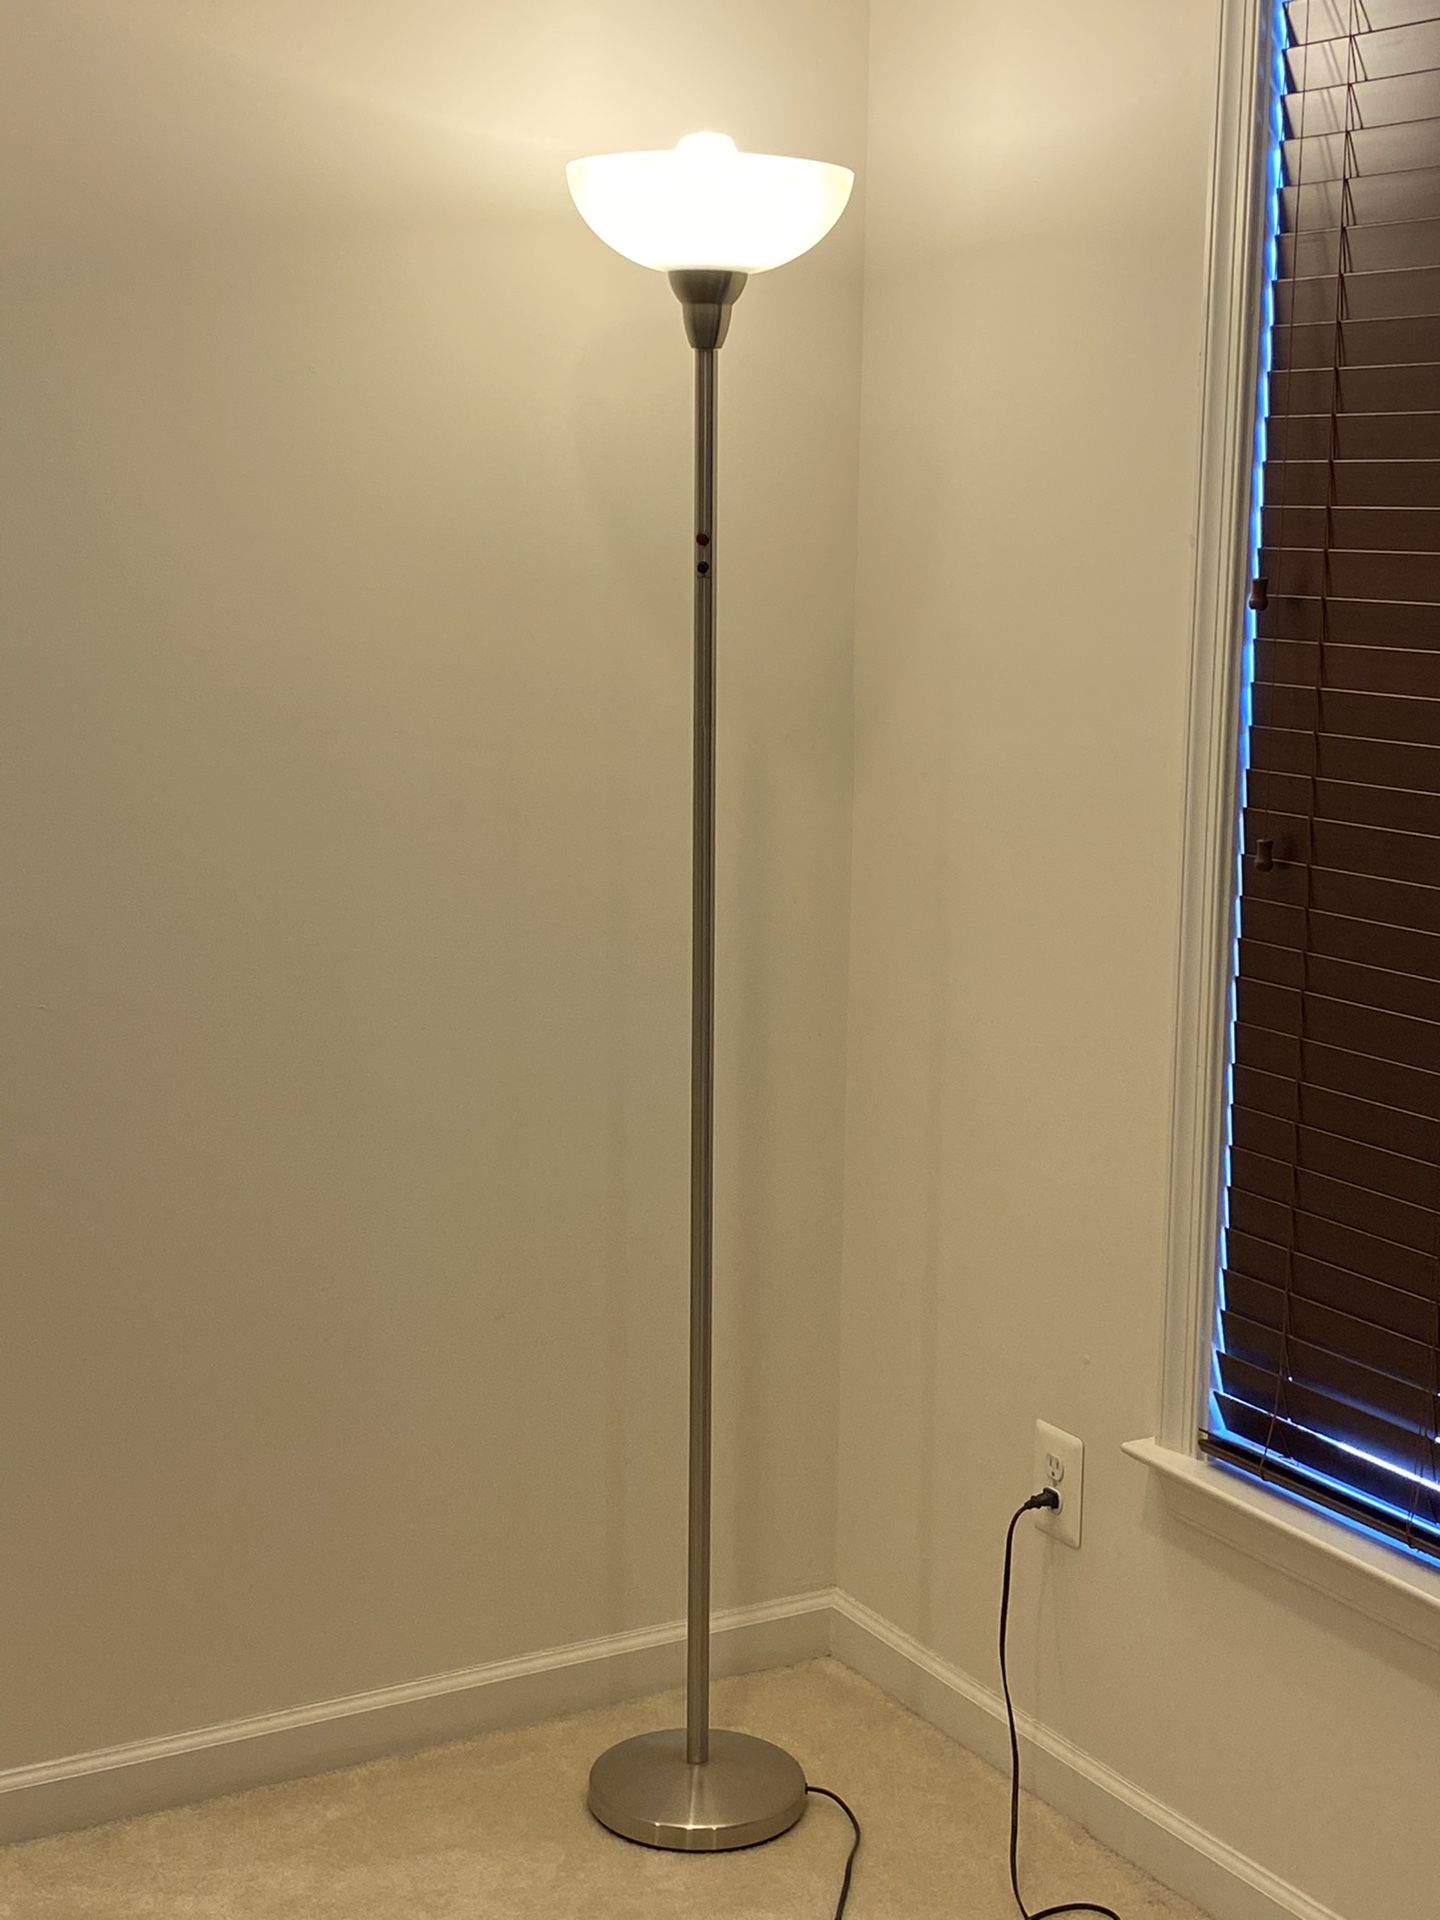 Floor Lamp with Remote Control Switch